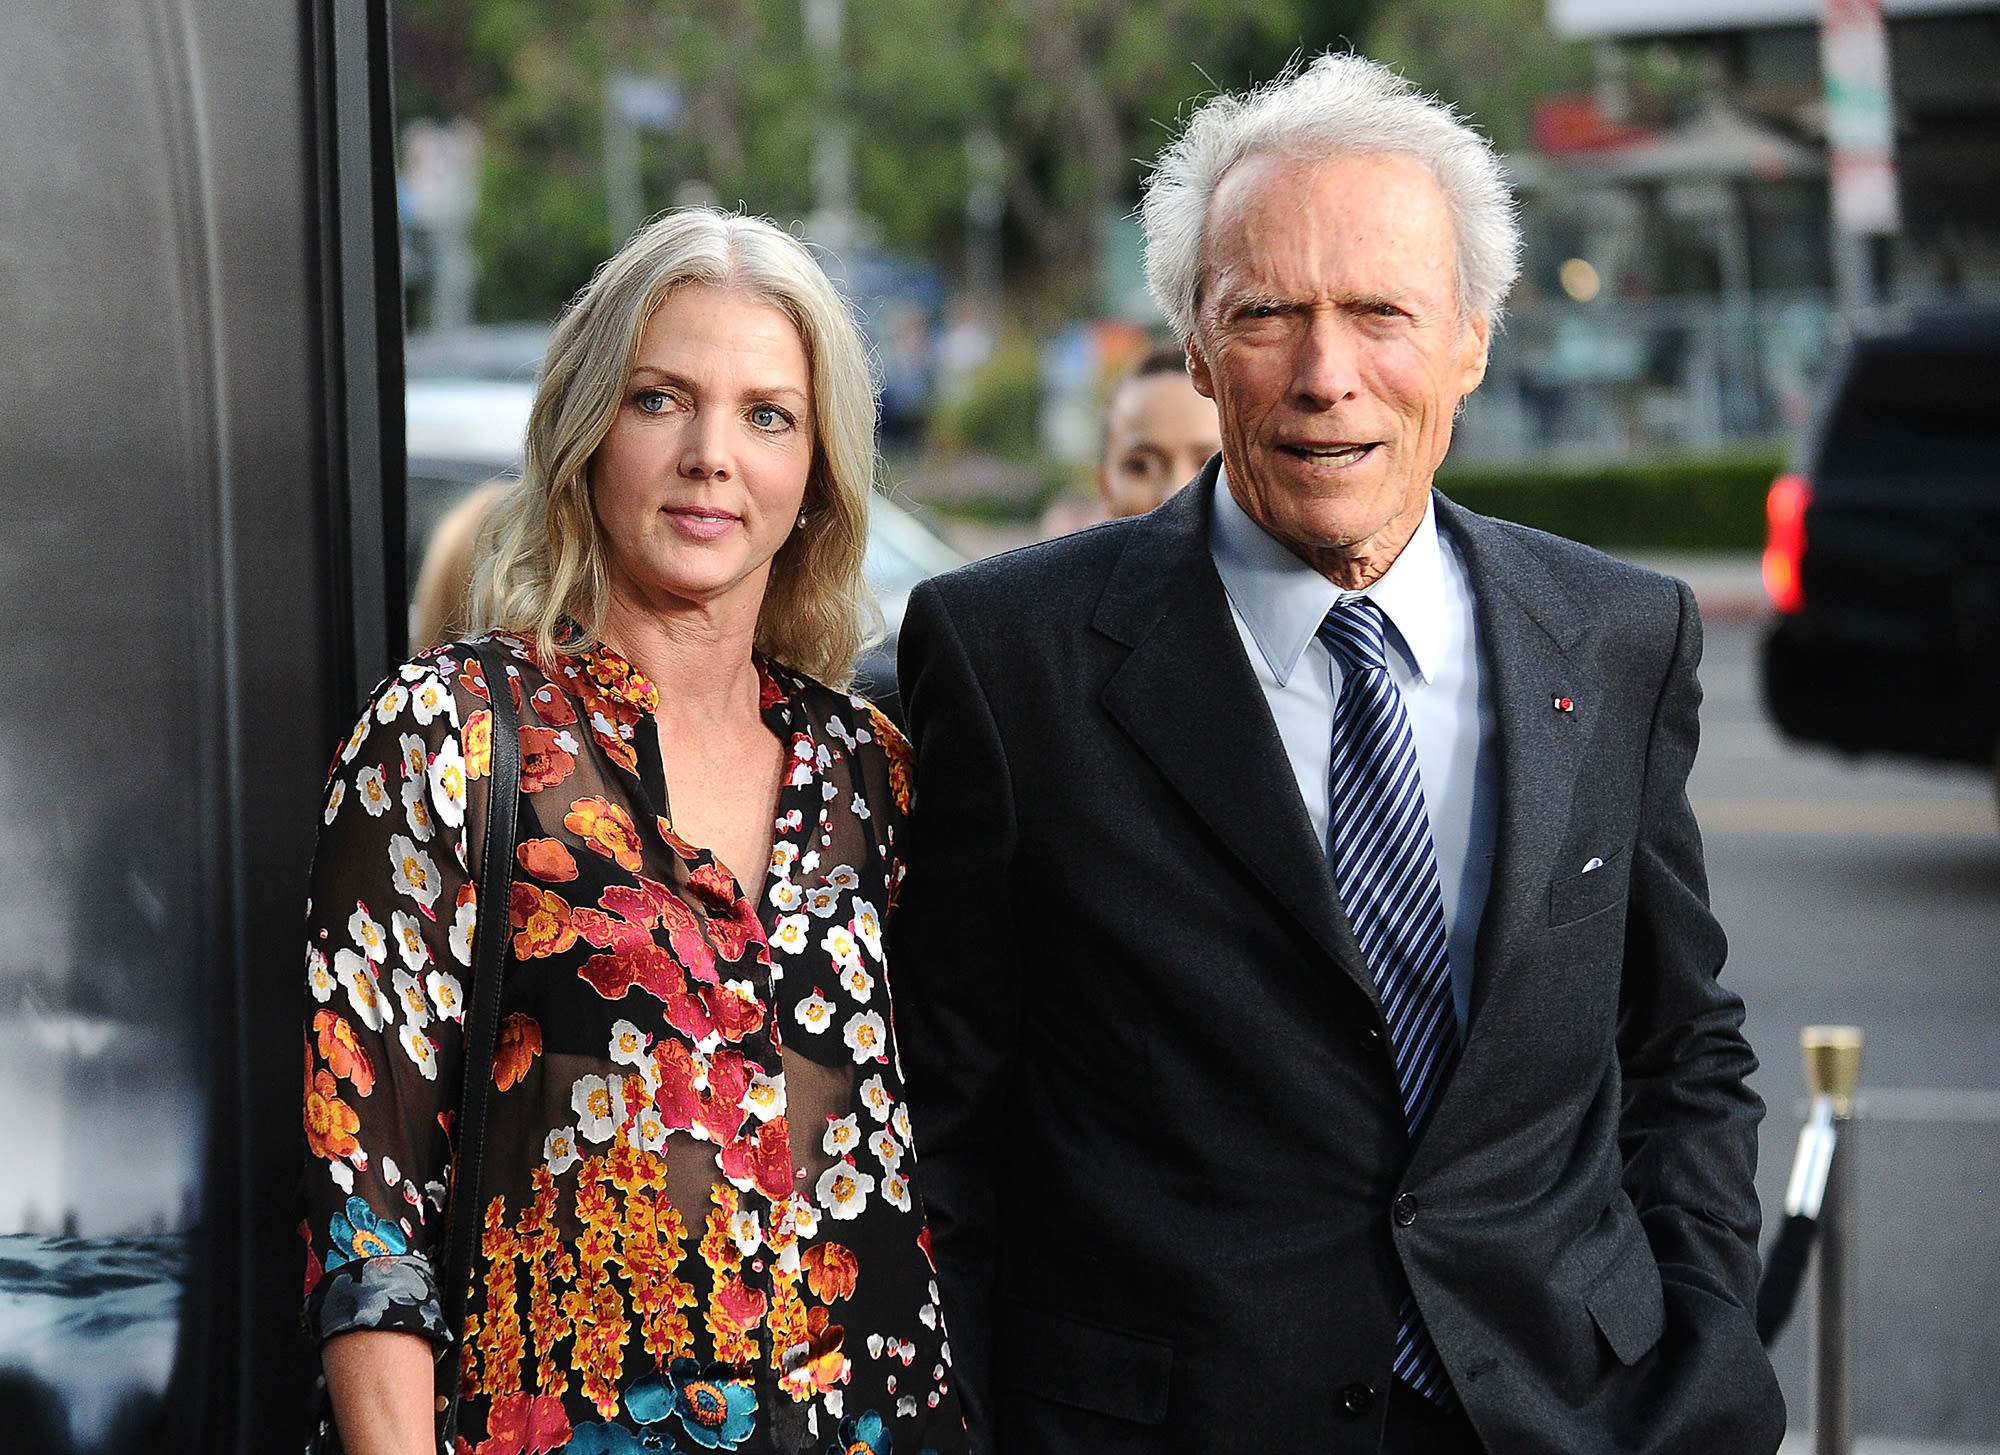 Clint Eastwood and Christina Sandera’s Relationship Timeline: From a Chance Meeting to Decade-Long Romance